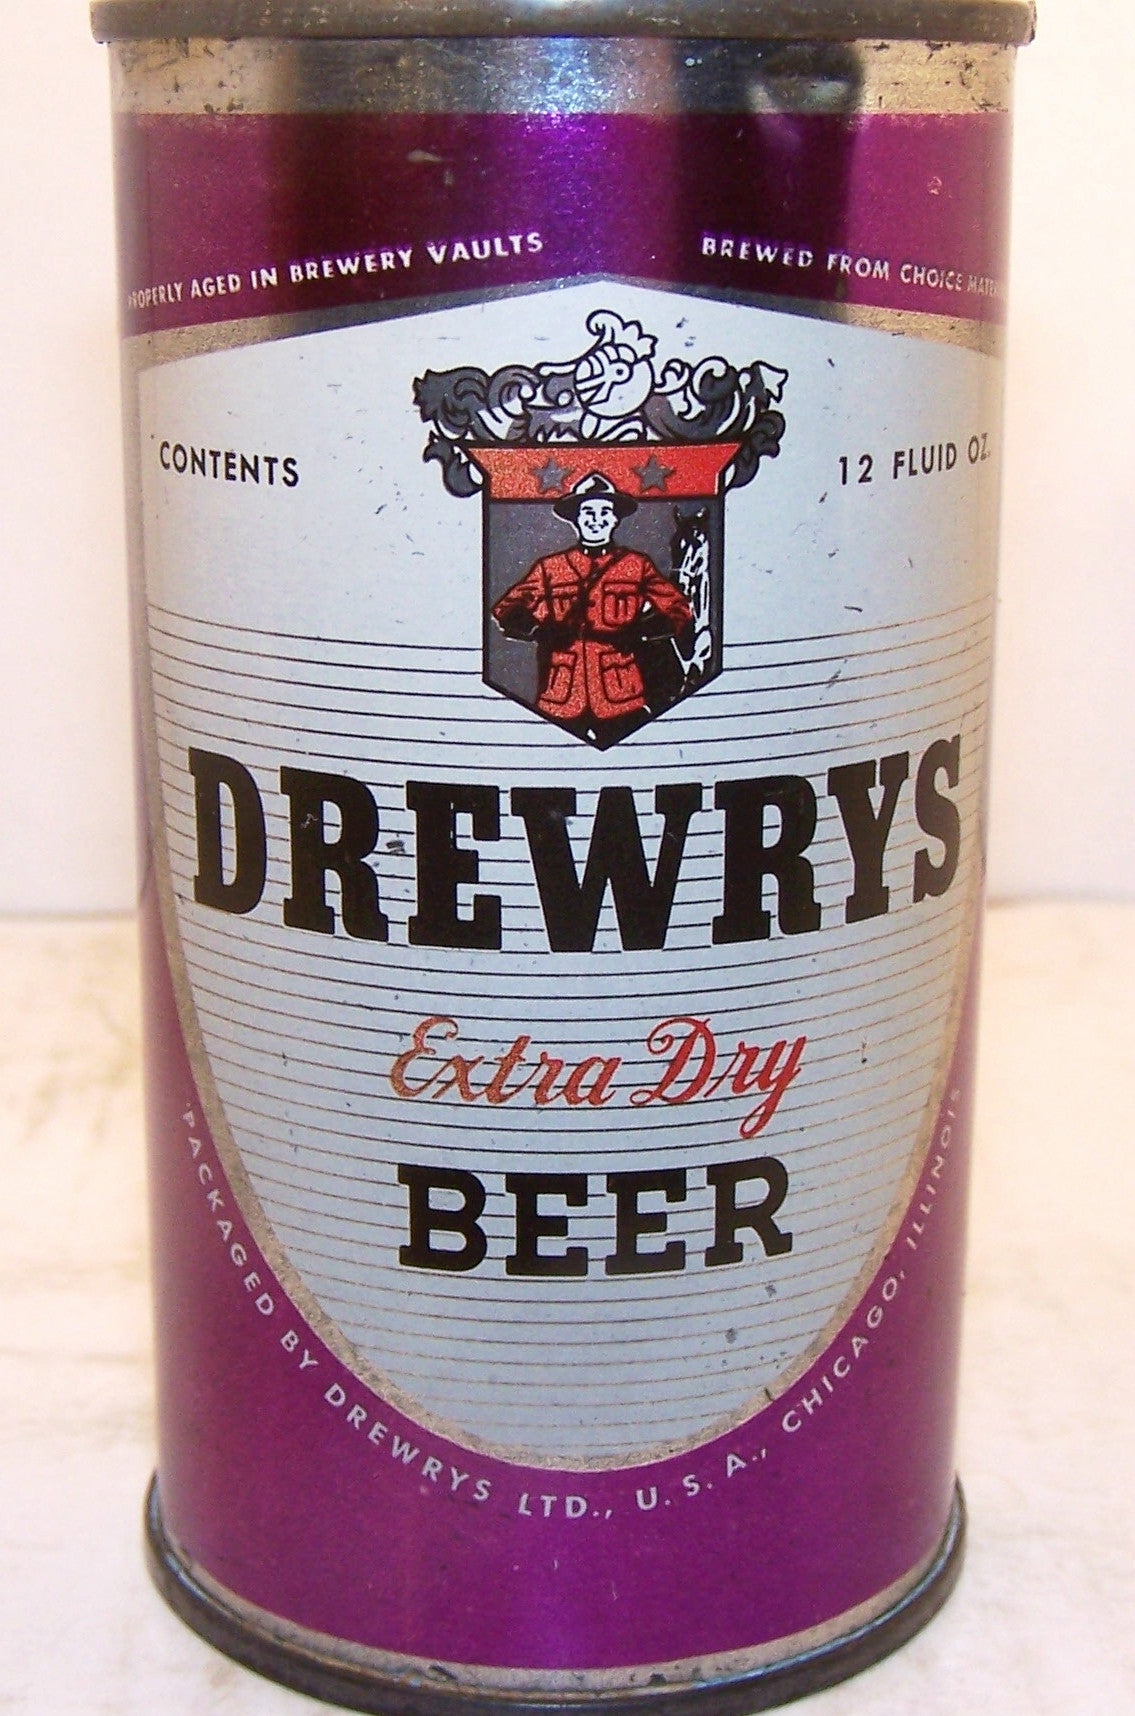 Drewrys Extra Dry Beer (Chicago) USBC 54-35,Grade 1- Sold on 10/05/15